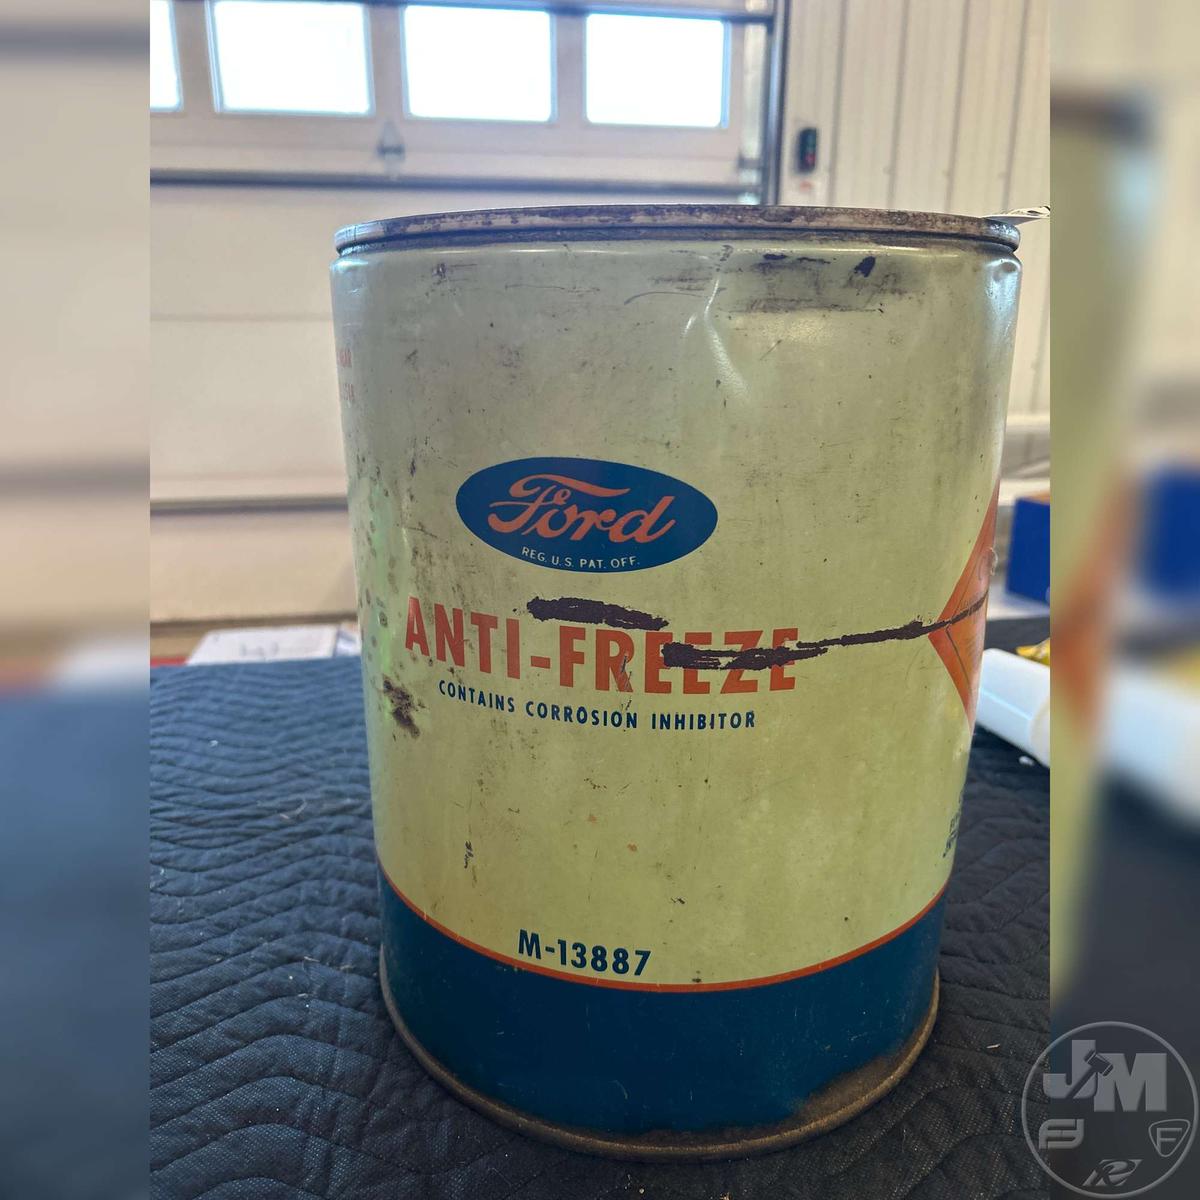 FORD ANTI-FREEZE CAN